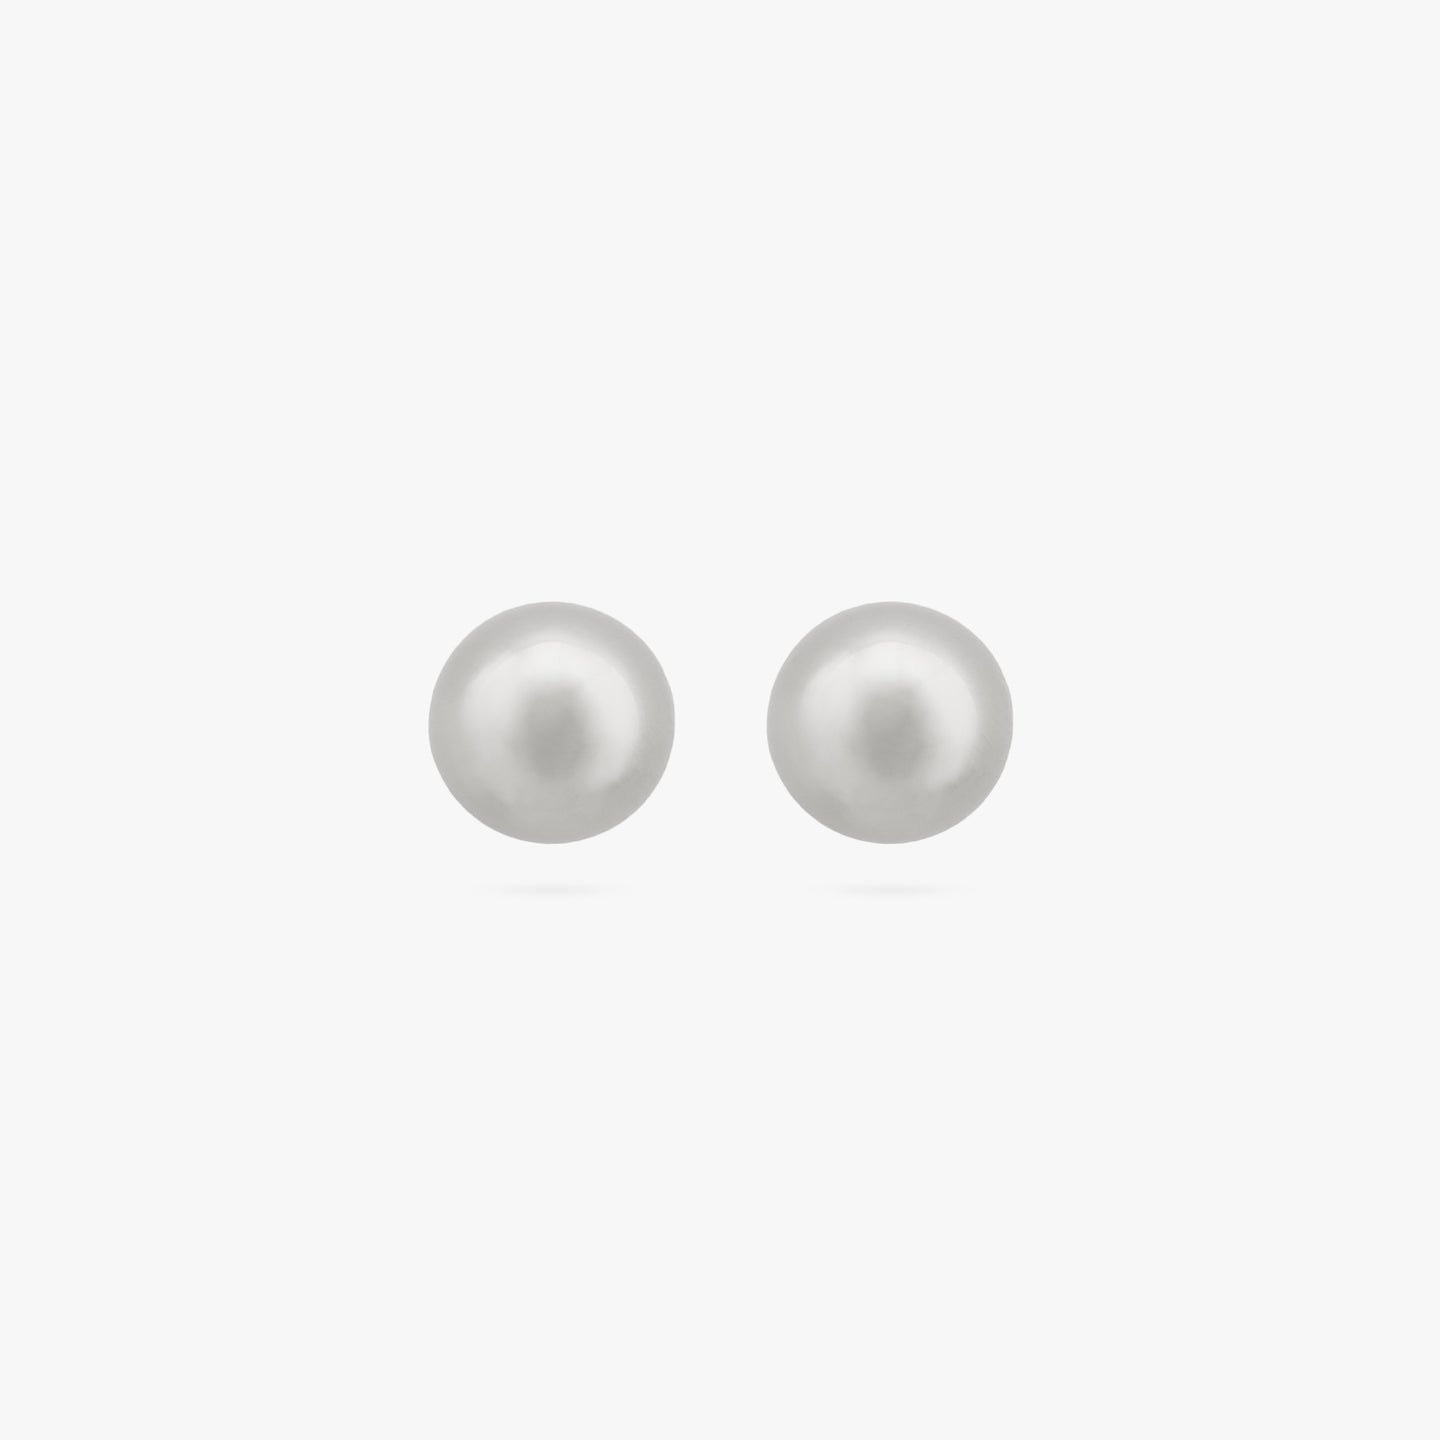 A pair of small silver ball shaped studs [pair] color:null|silver